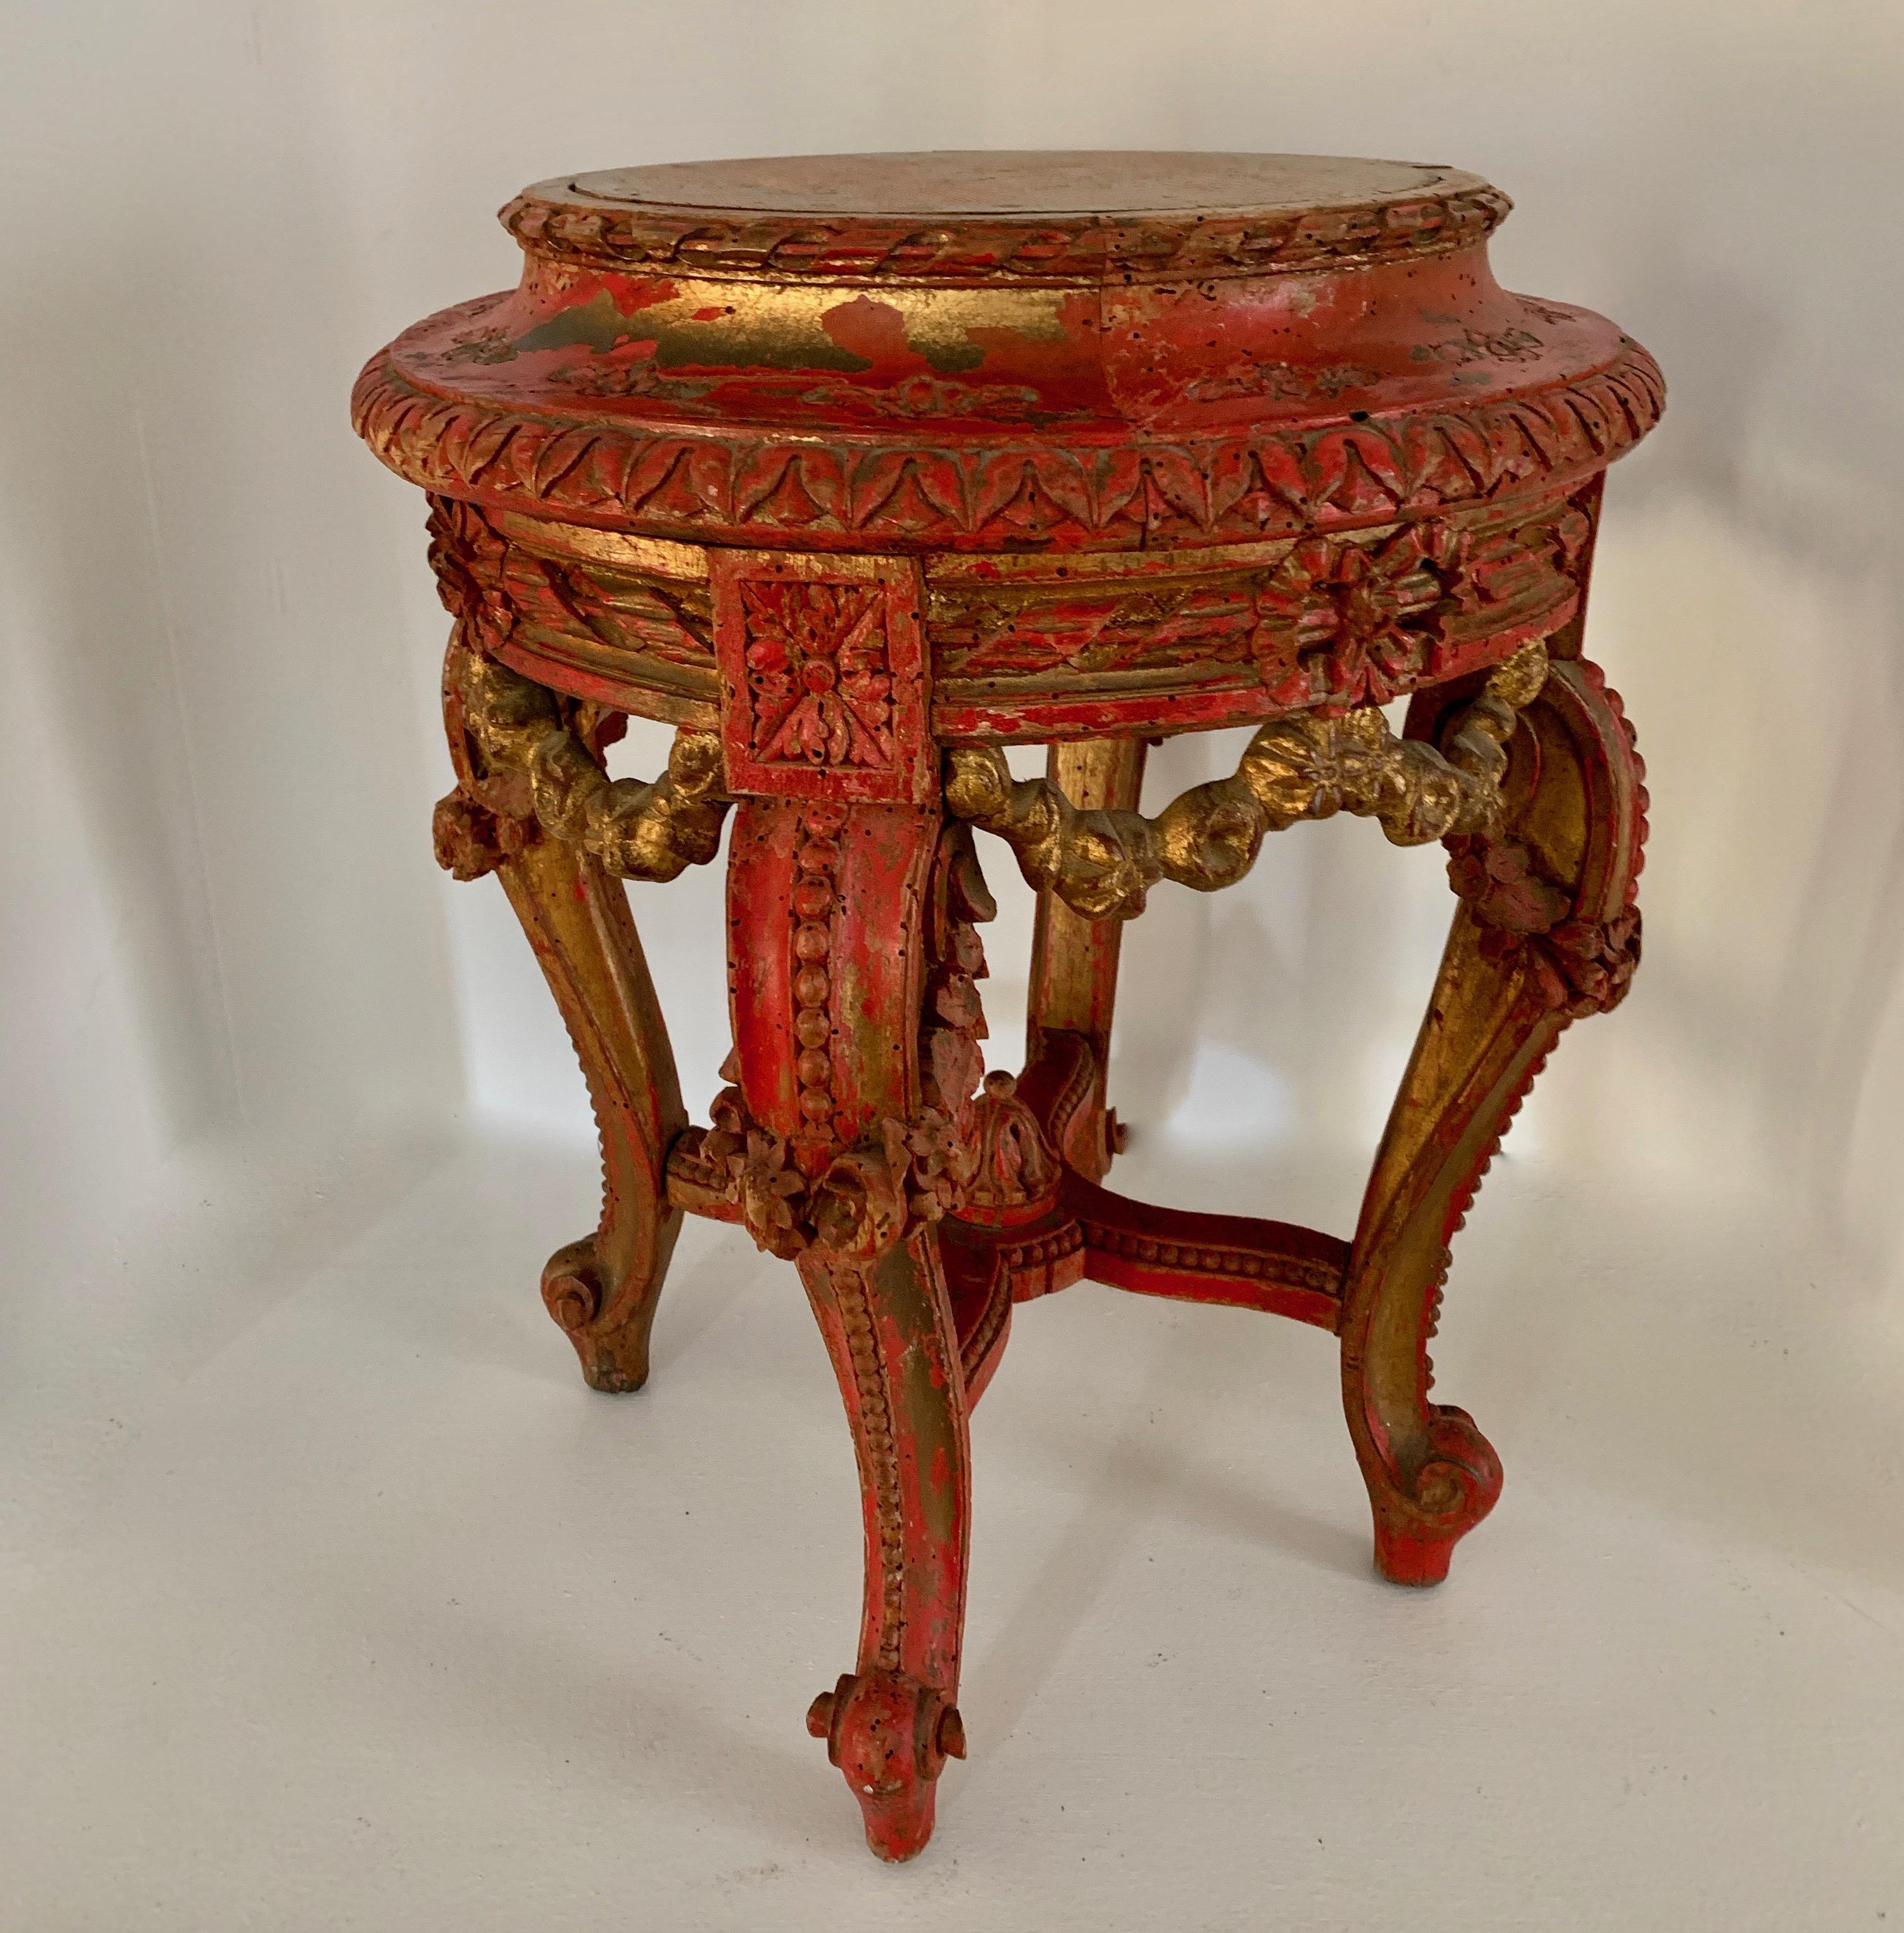 Parcel gilt hand carved French table, small drink table, a wonderful red color with gilding. The table is hand carved and a lovely addition to any room. An additional round piece of glass comes with this piece. Works well in any environment, from